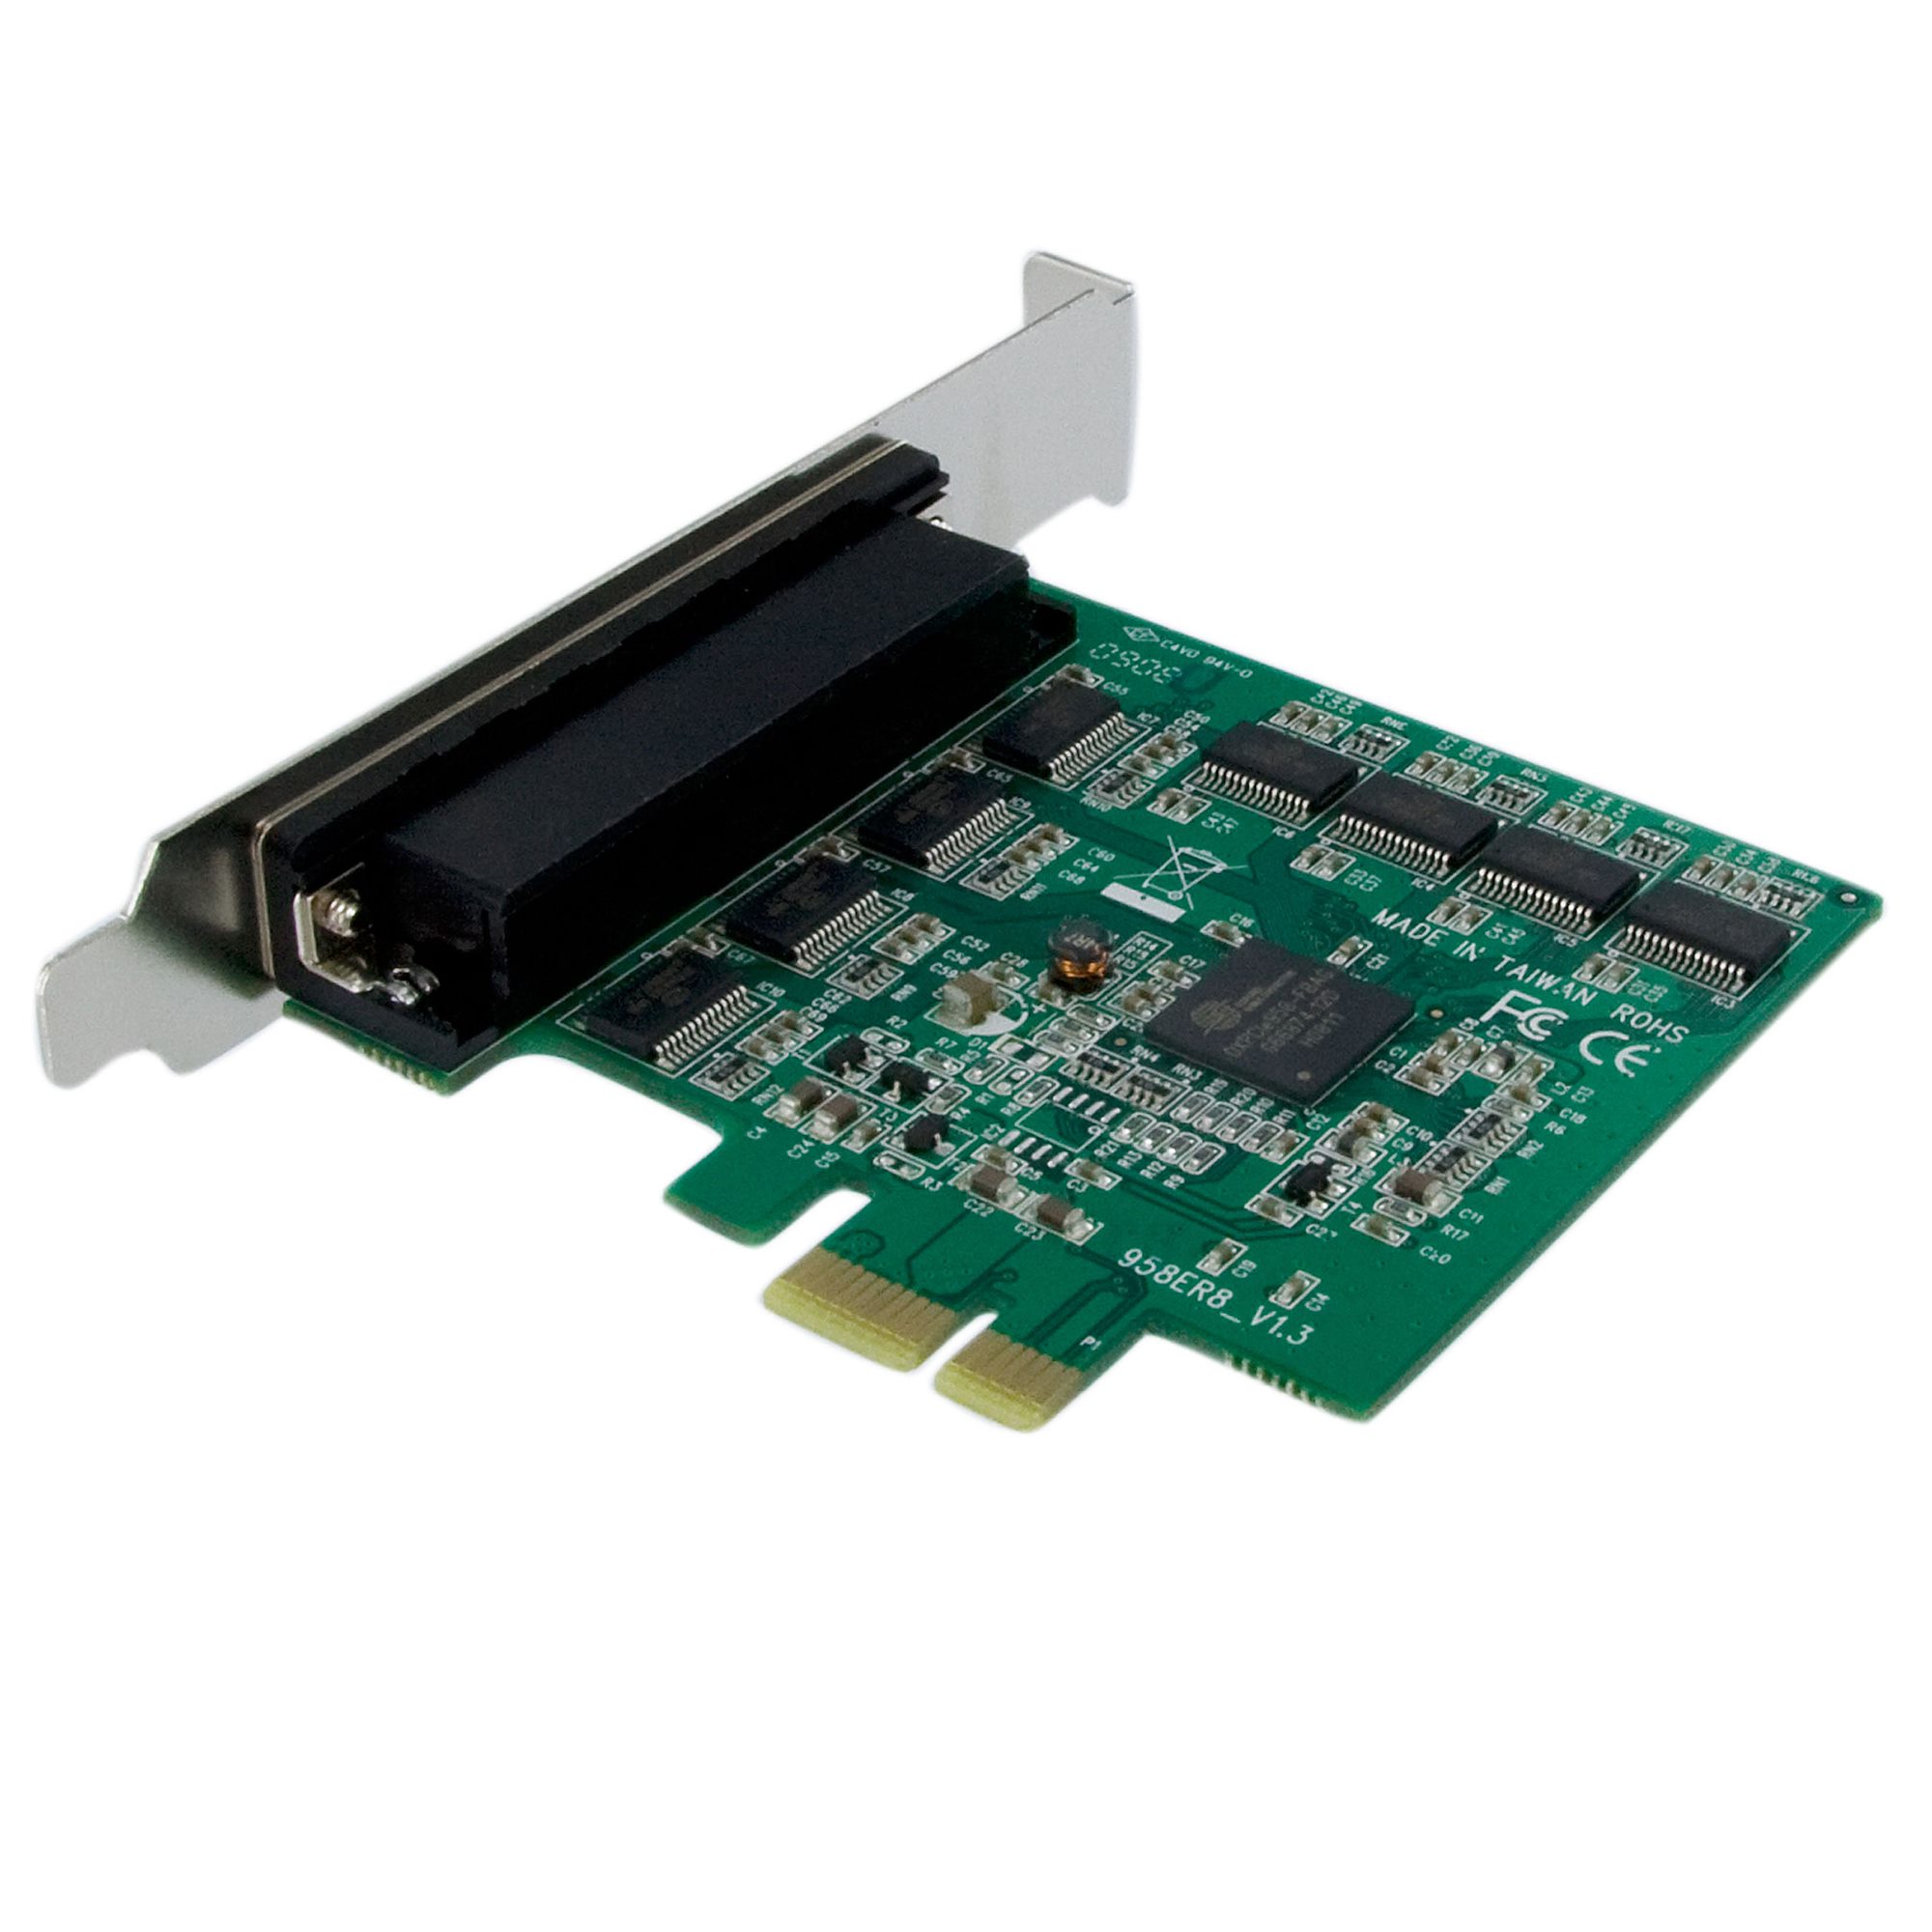 StarTech.com 8 Port Native PCI Express RS232 Serial Adapter Card with 16950 UART 8 Port PCIe RS232 Serial Card 